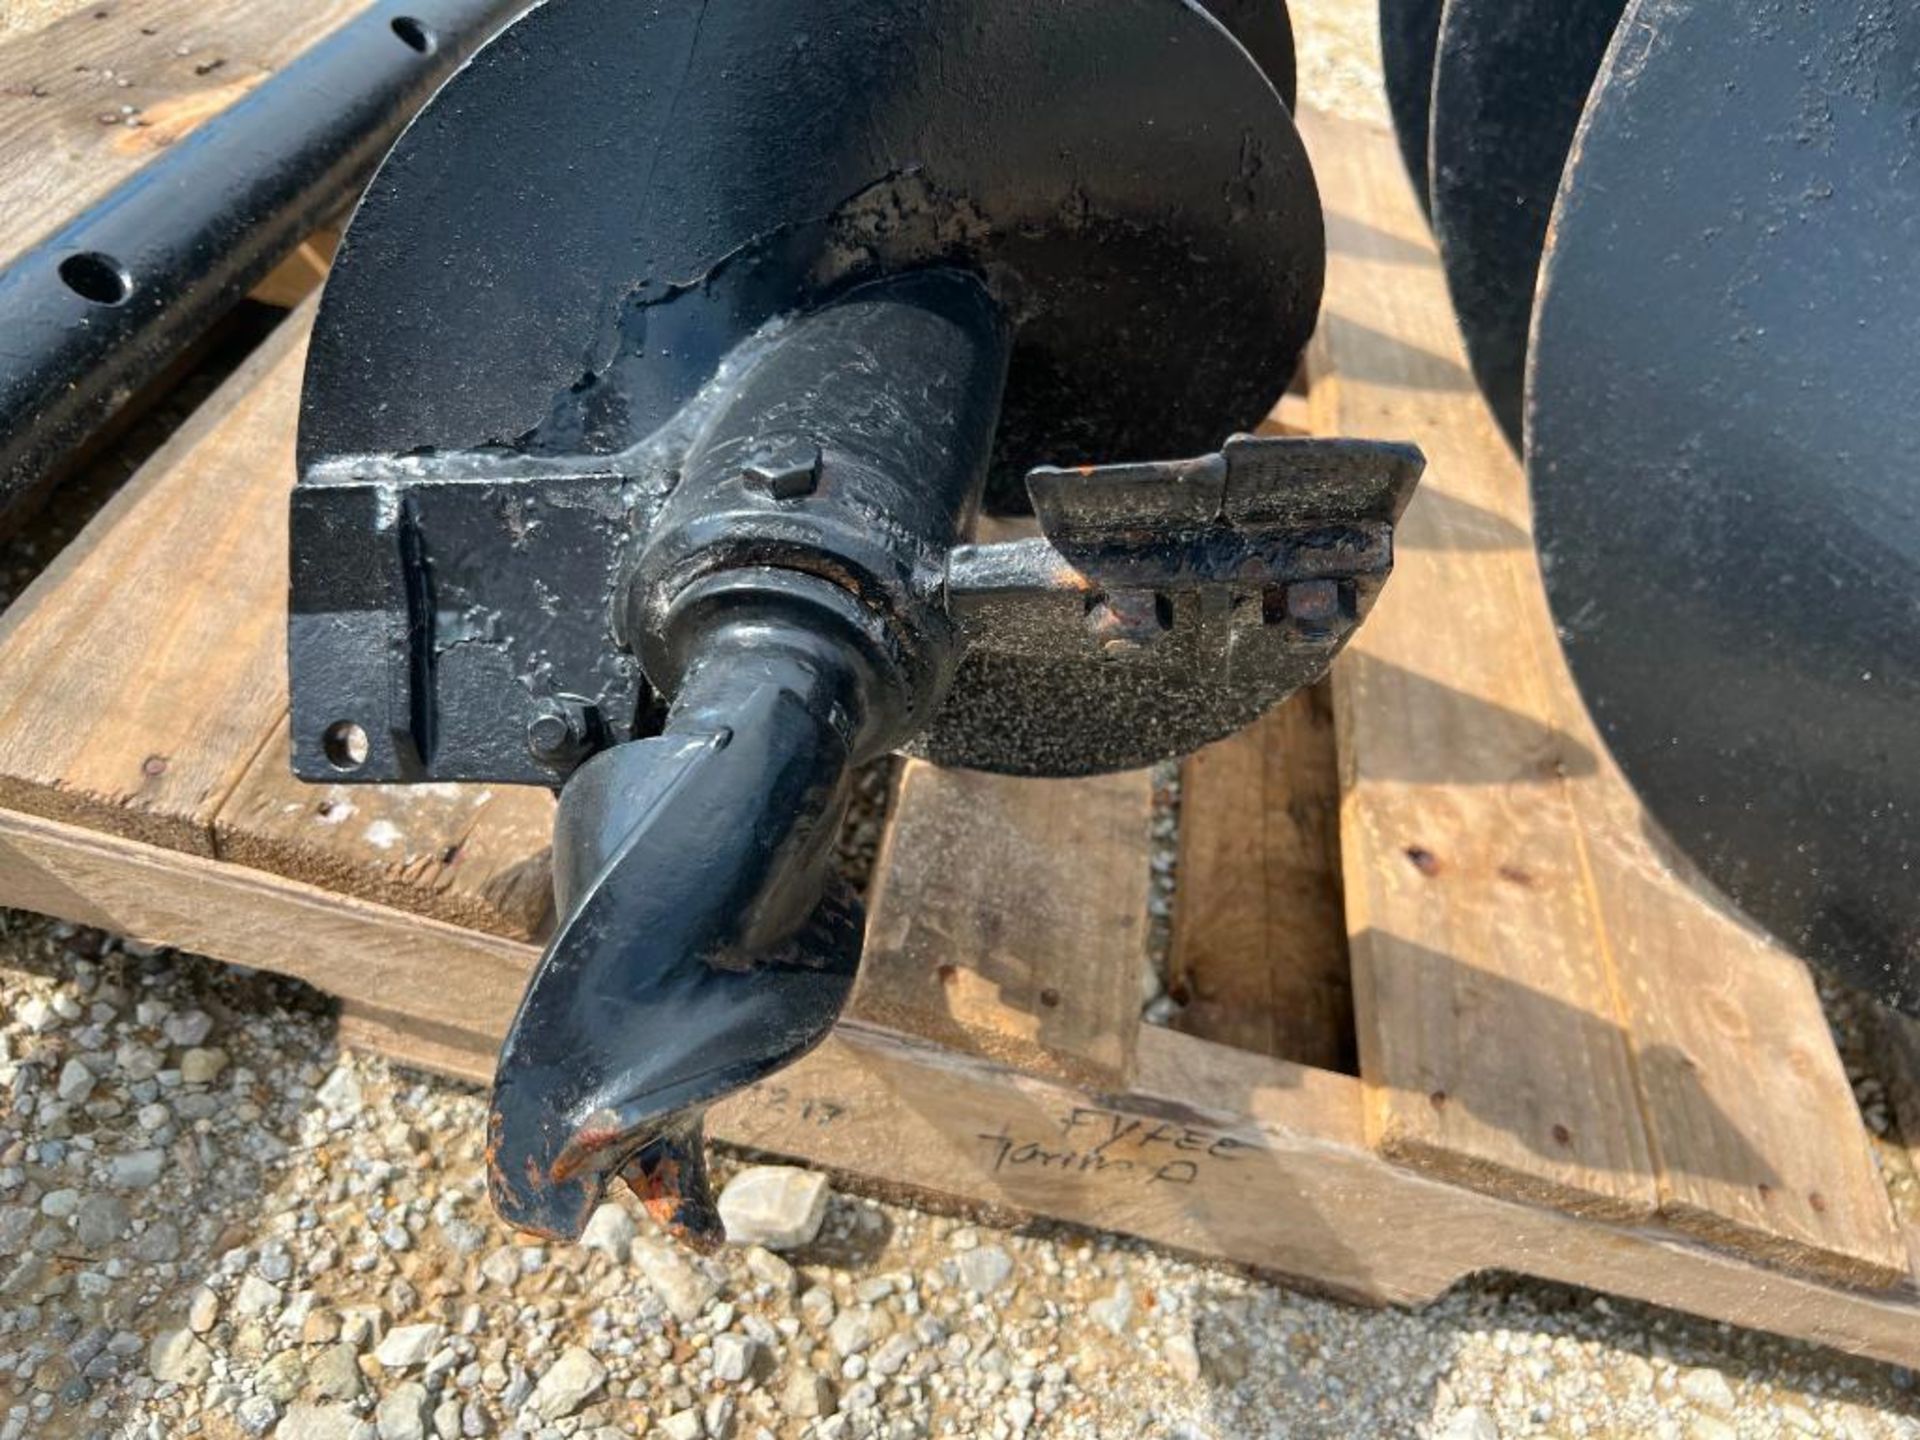 New Bobcat 12" Auger Bit. Located in Altamont, IL - Image 2 of 2